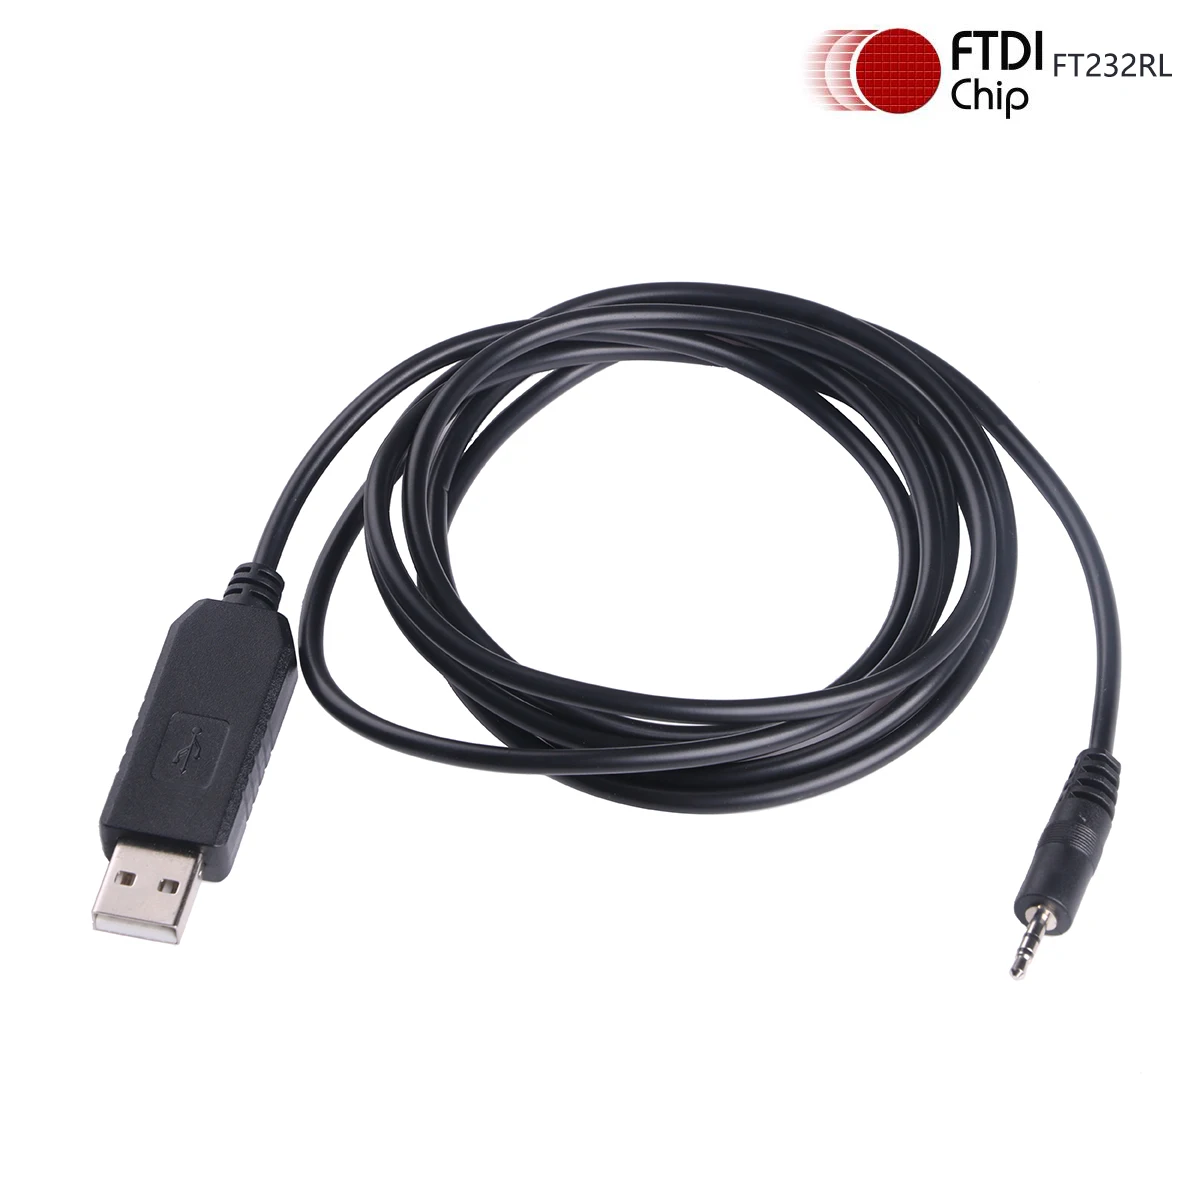 6FT USB RS232 to 3.5mm AJ Audio Jack Programming Cable 5v TTL uart Cable  for Windows,Linux and MAC OS (5v Logic Level)